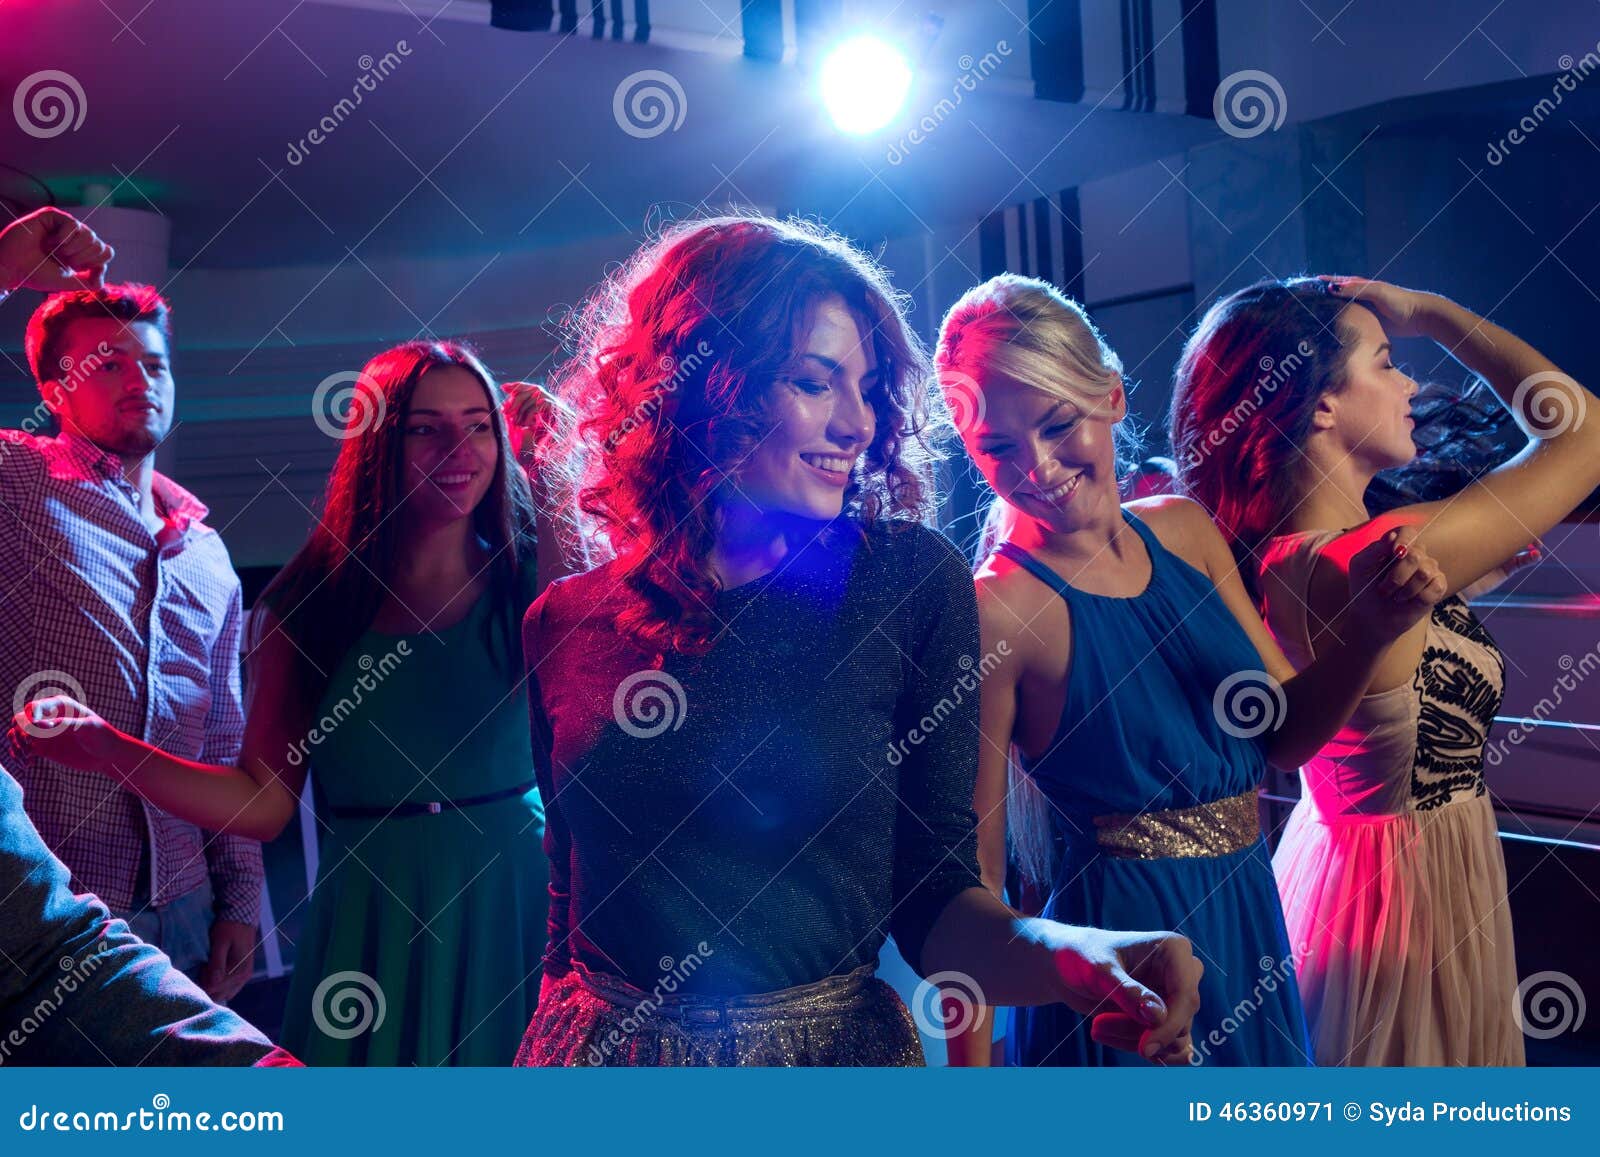 Smiling Friends Dancing in Club Stock Image - Image of club, music ...